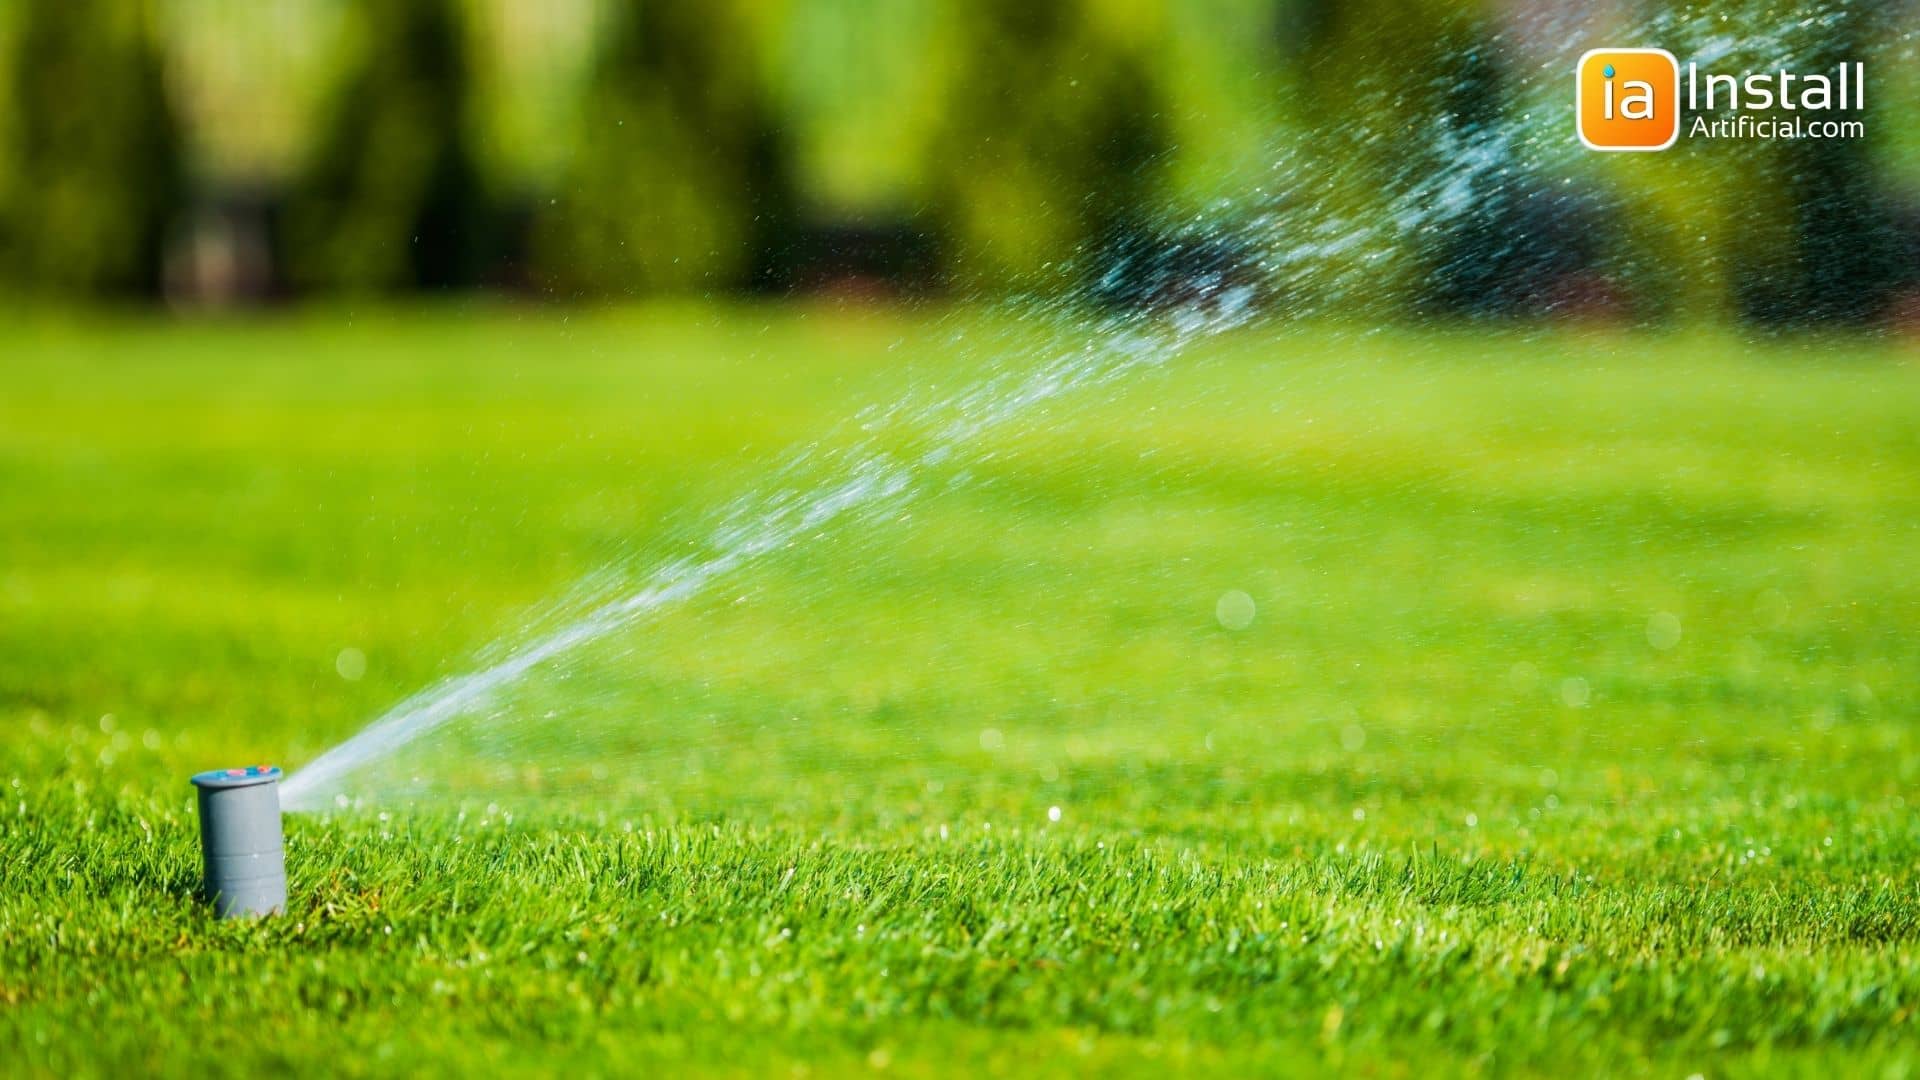 Governor Newsom Proposes Executive order to ban the watering of non-functional commercial lawns